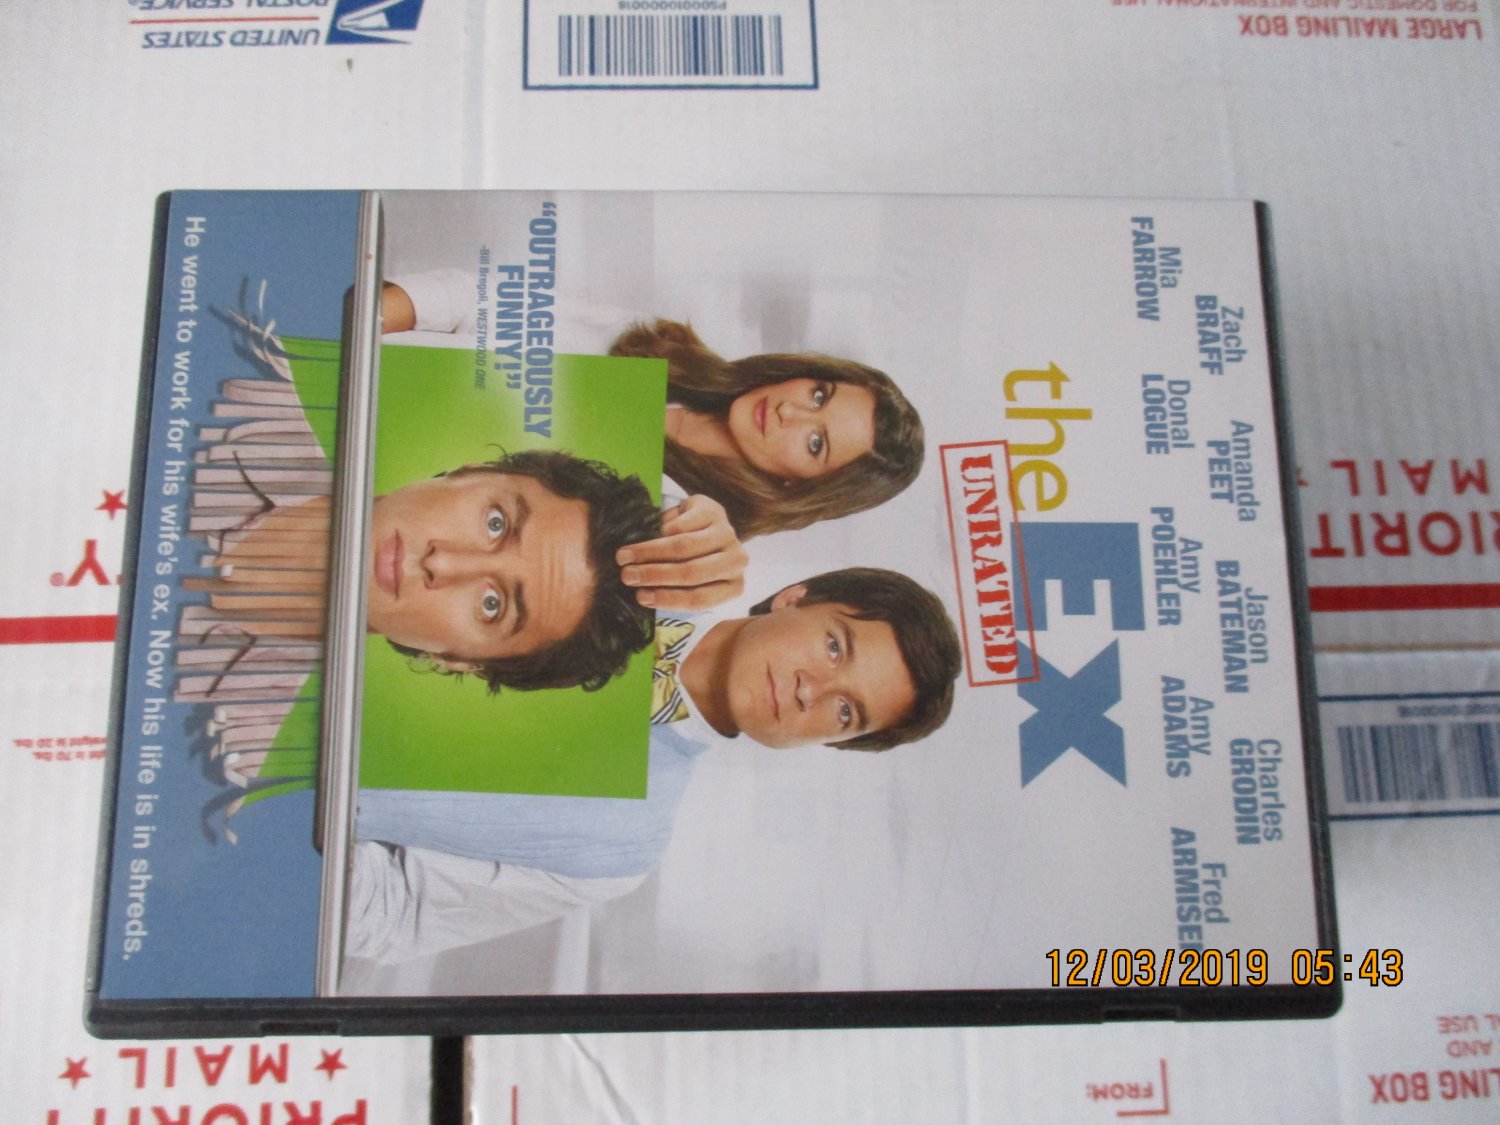 The Ex Unrated dvd